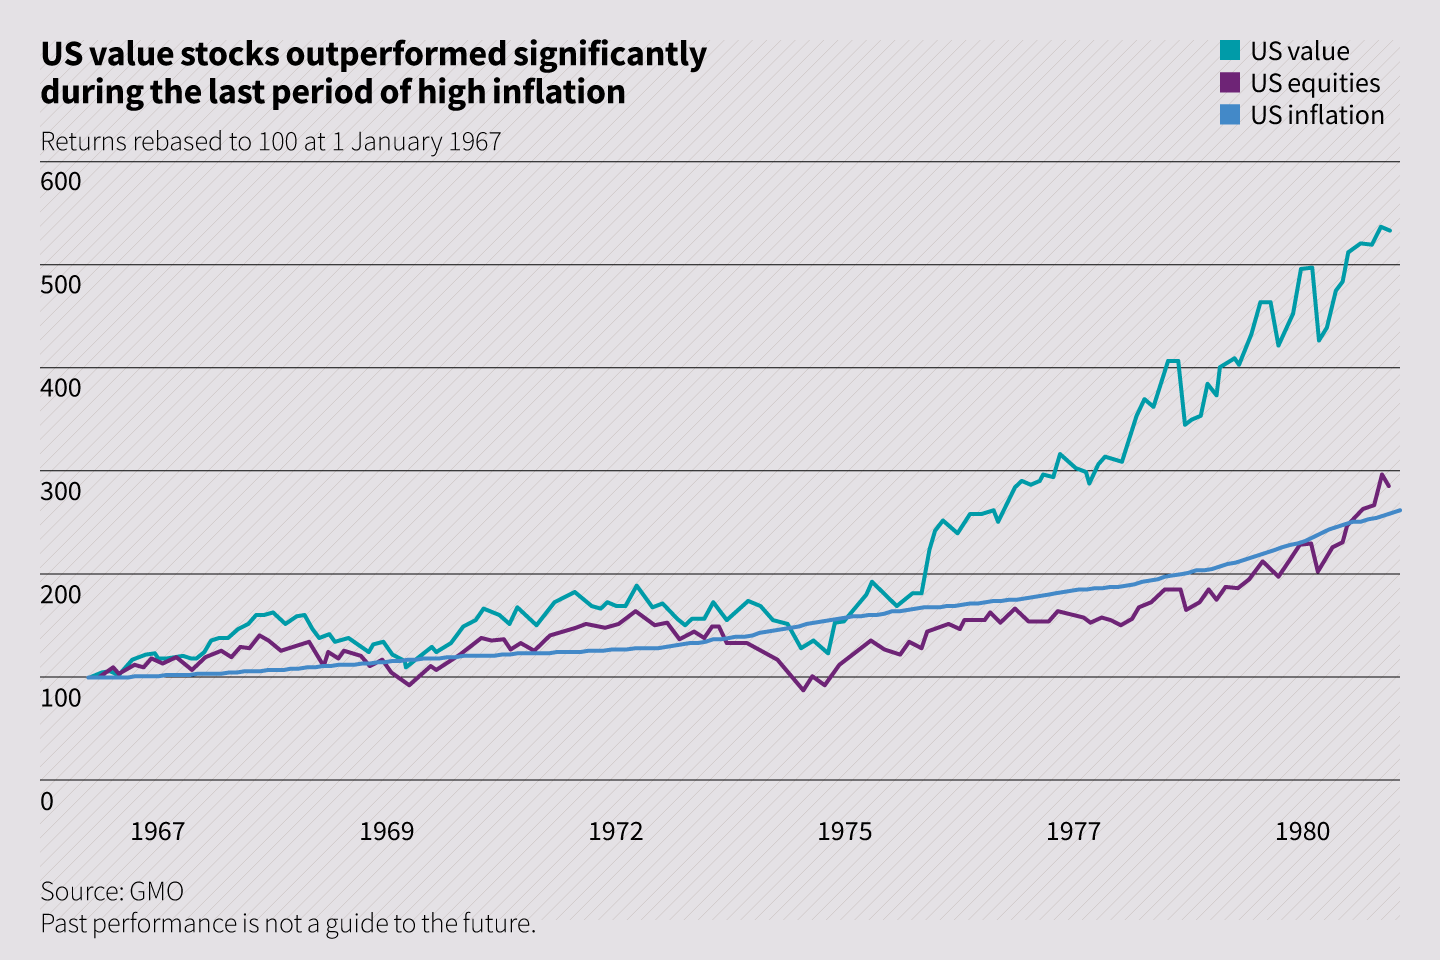 US value stocks outperformed significantly during the last period of high inflation